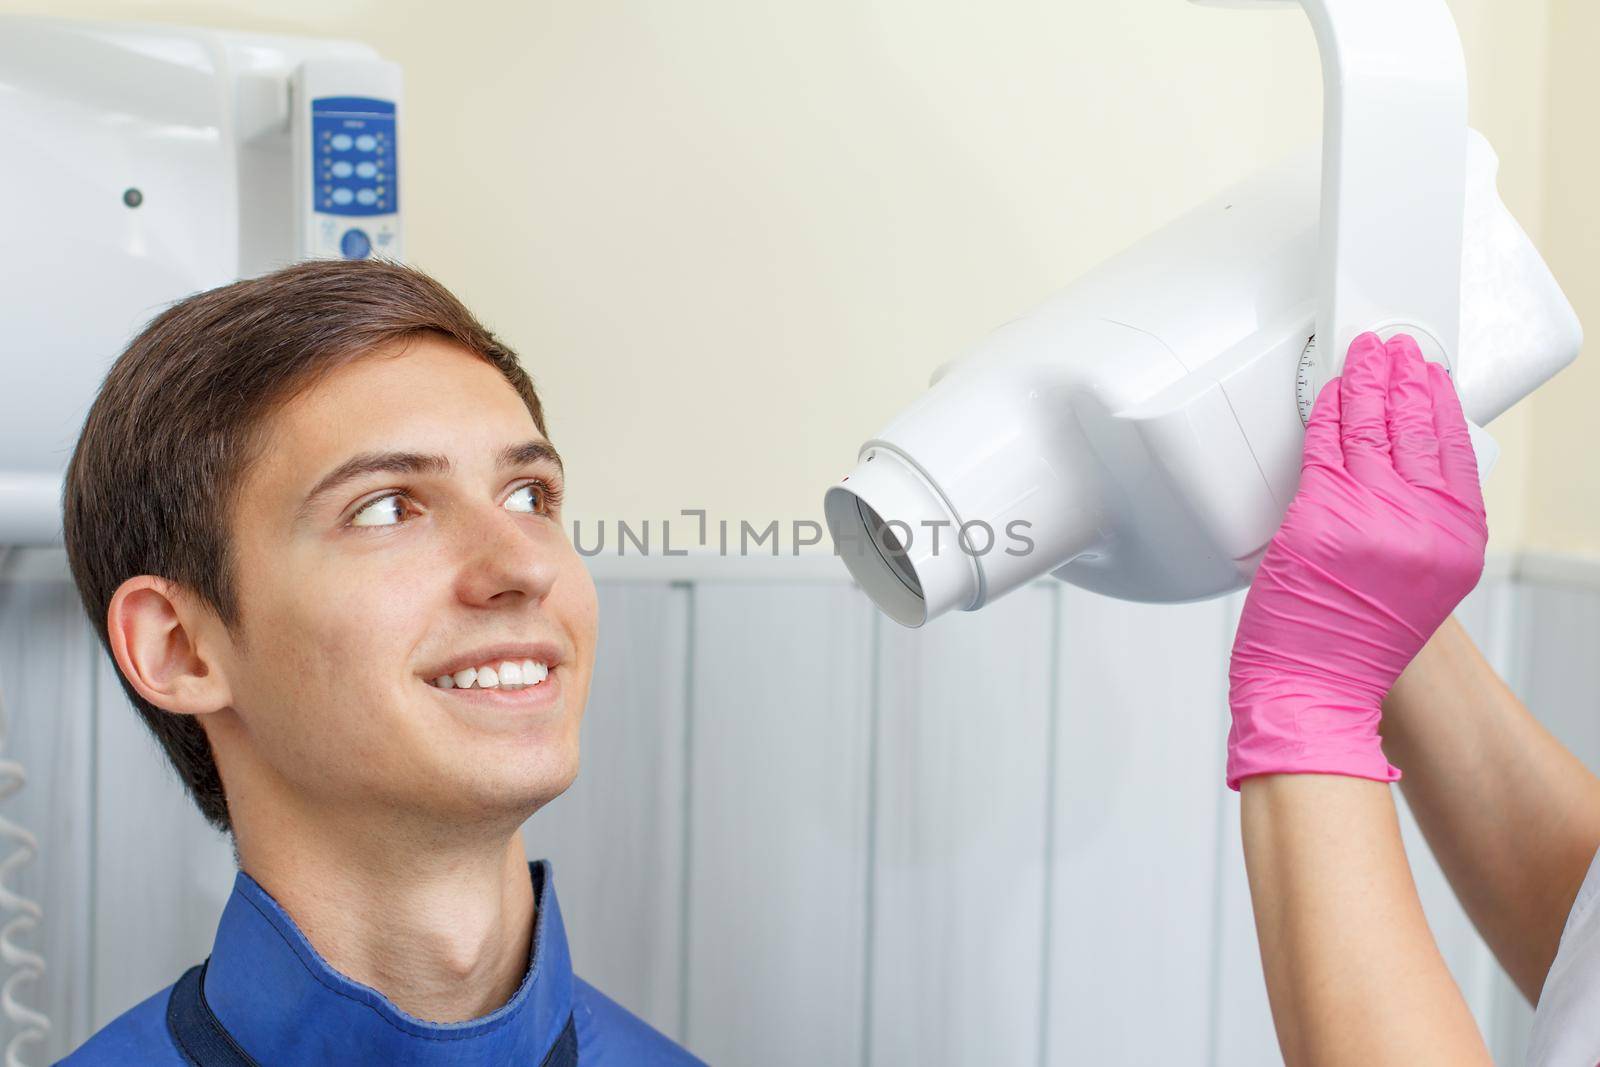 Female dentist is going to make teeth x-ray image for handsome young man in dental clinic. Using dental x-ray machine in dental office. Dental equipment